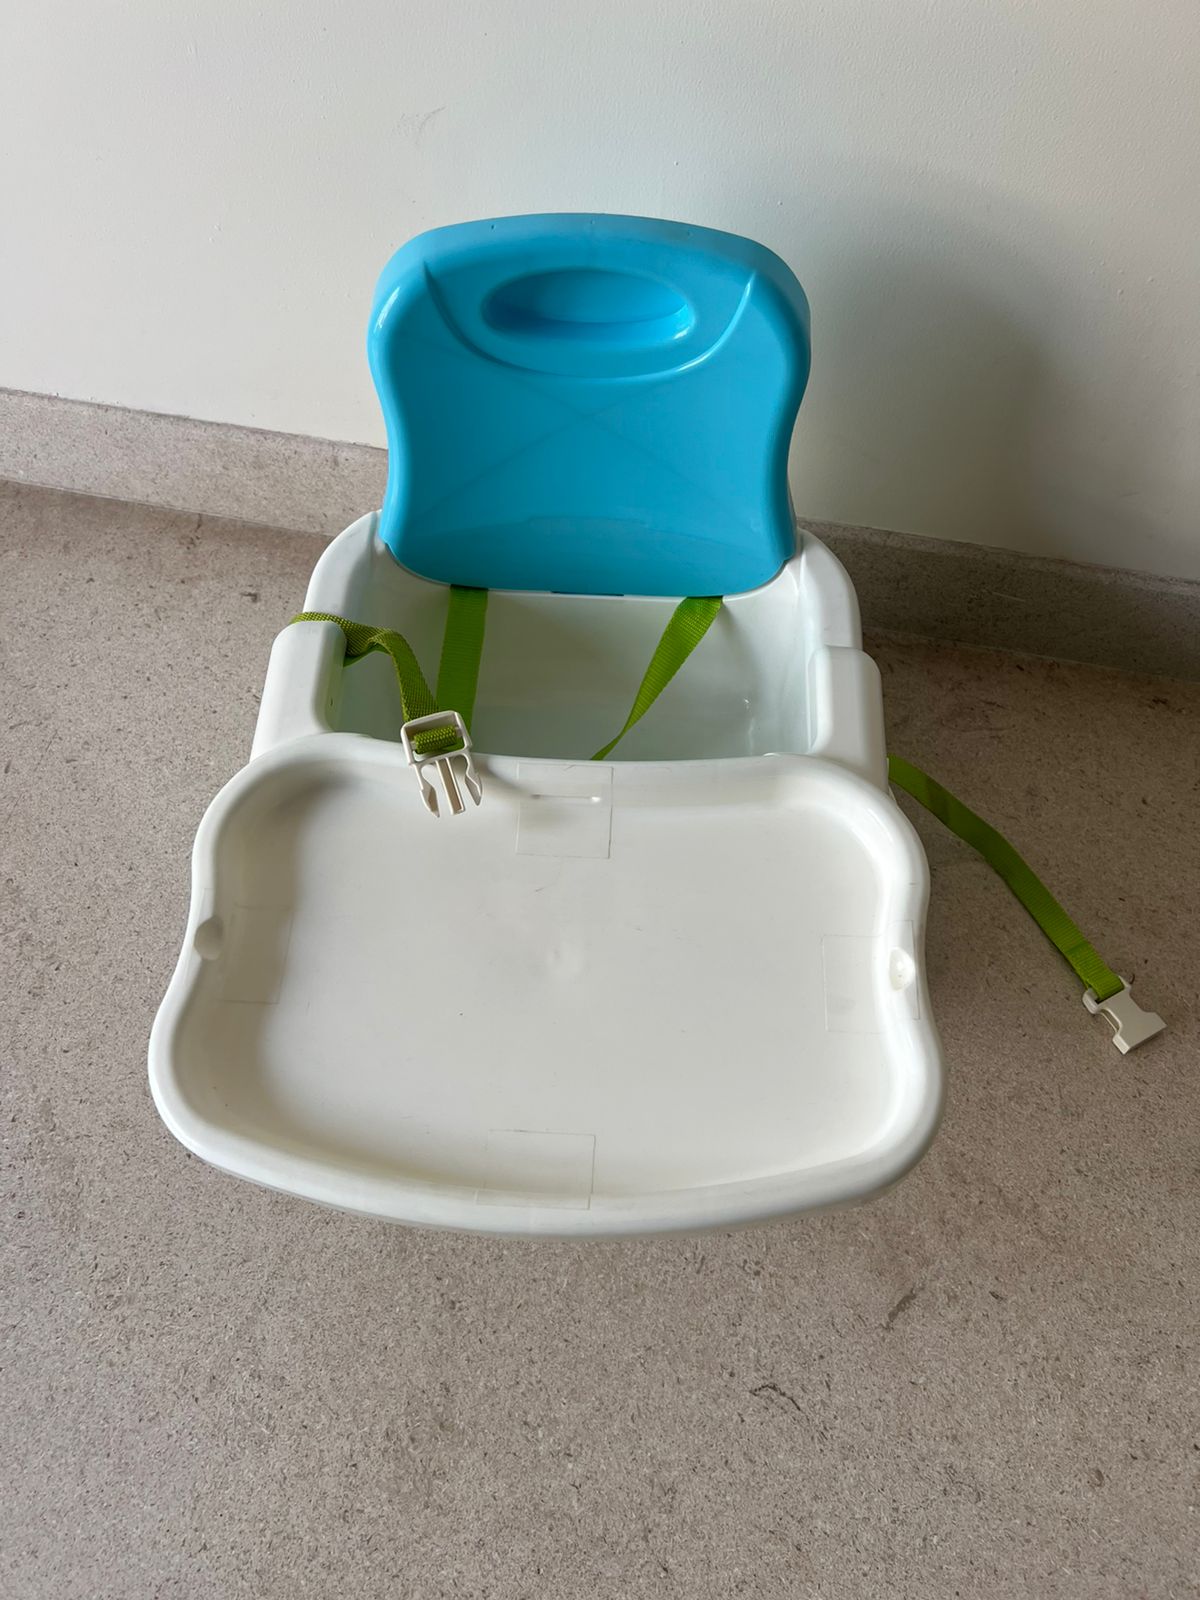 High Chair for Baby